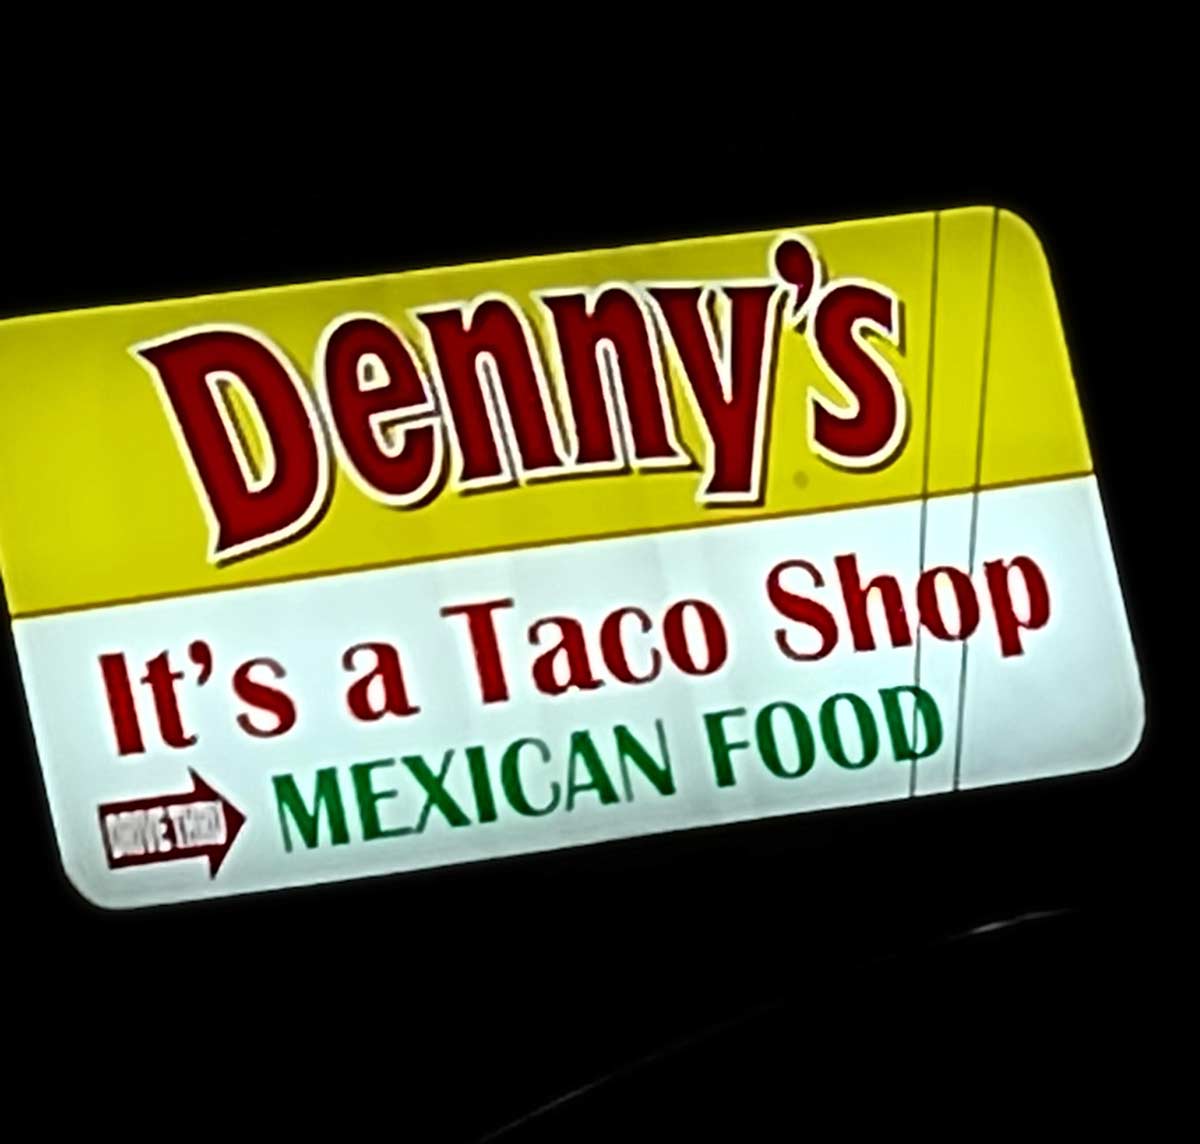 I thought Denny's was trying something new... turns out they were two different signs